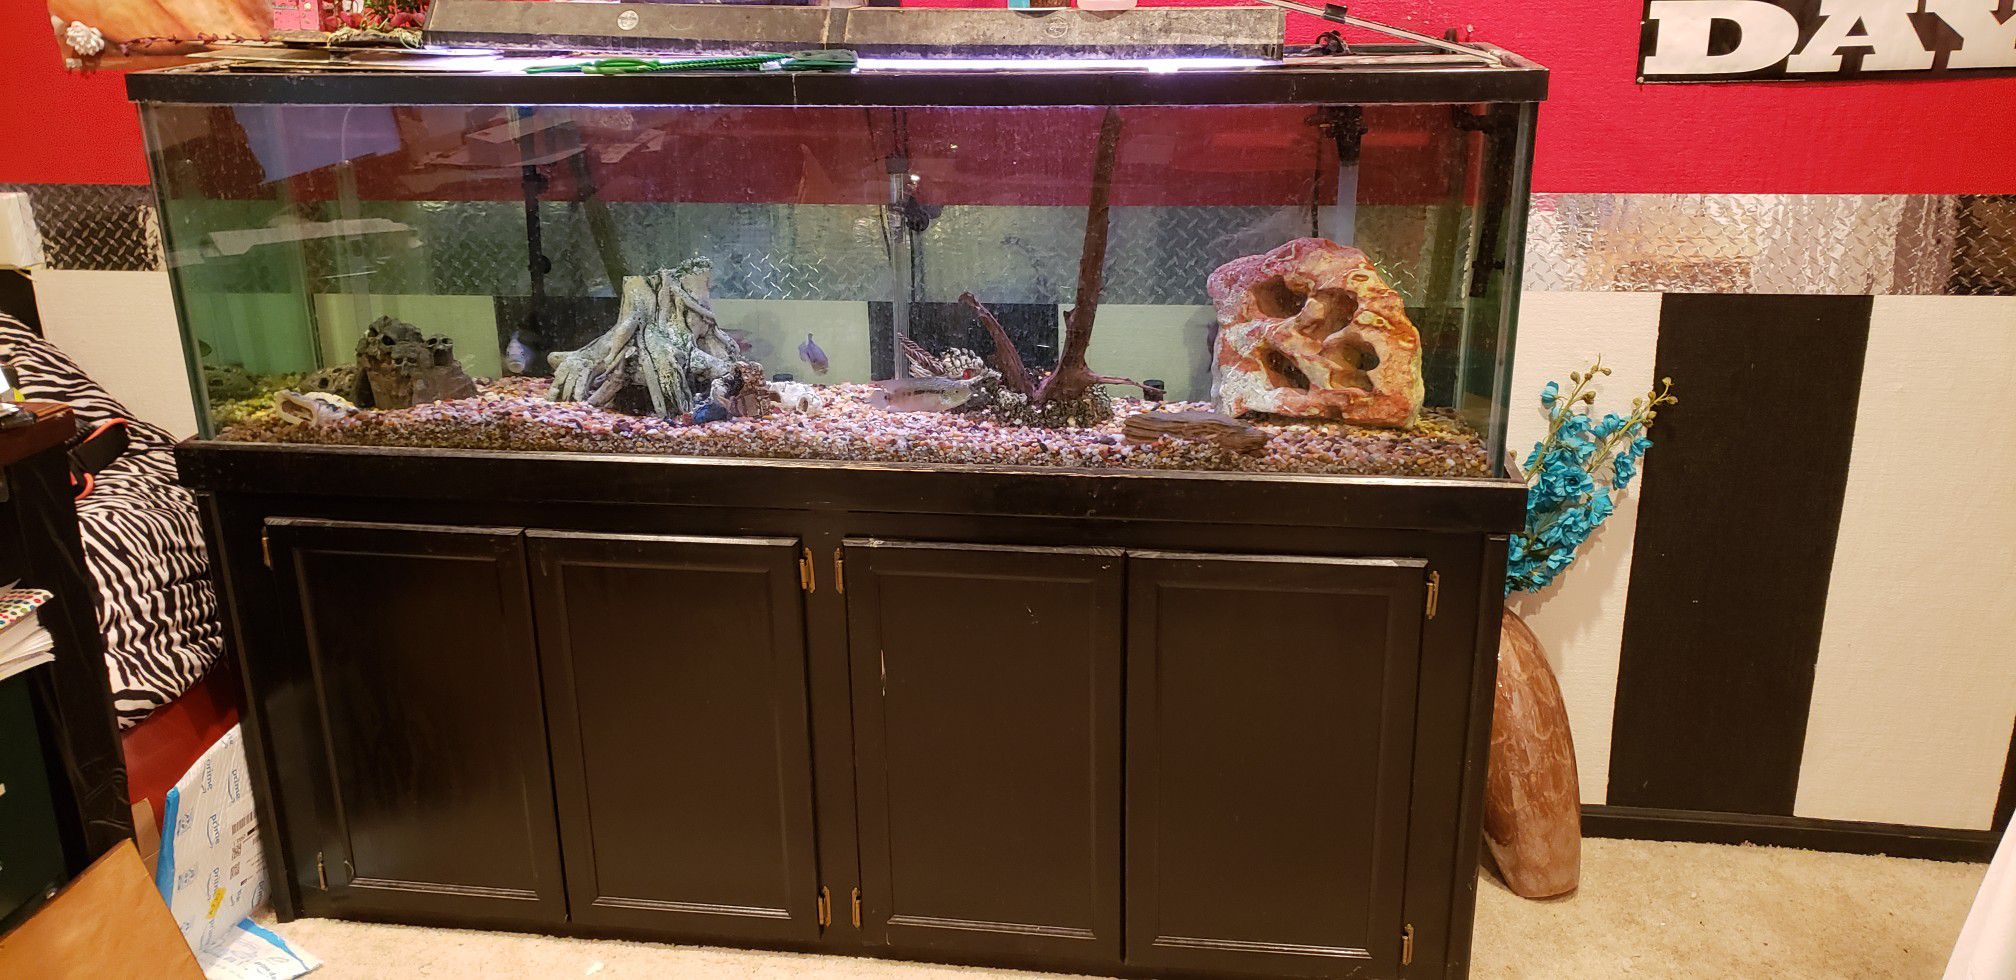 125 gallon fish tank everything pictured is included